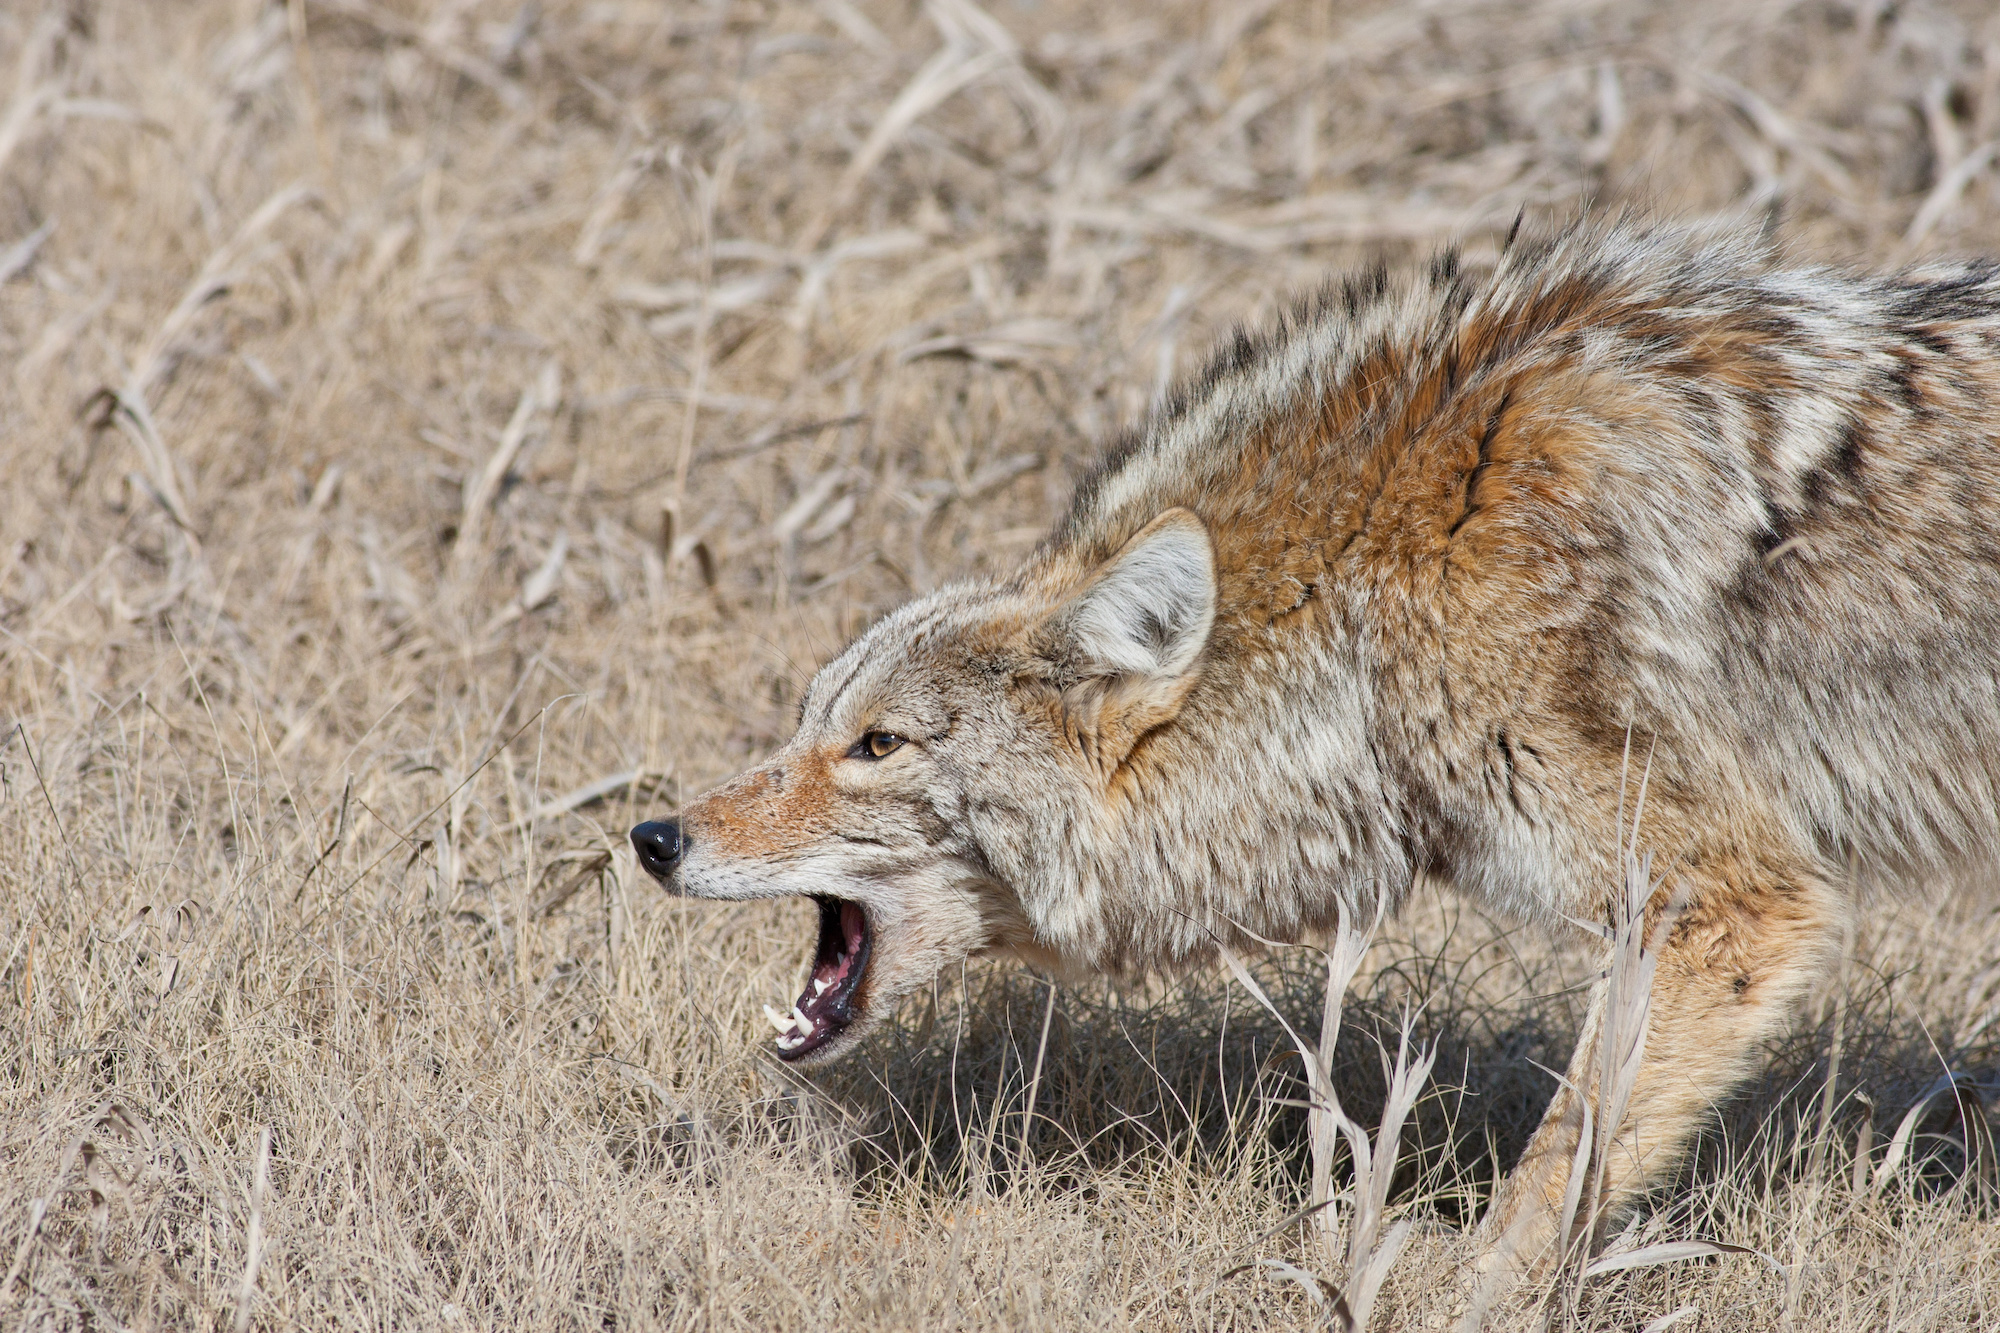 How Often Do Coyotes Attack Humans?